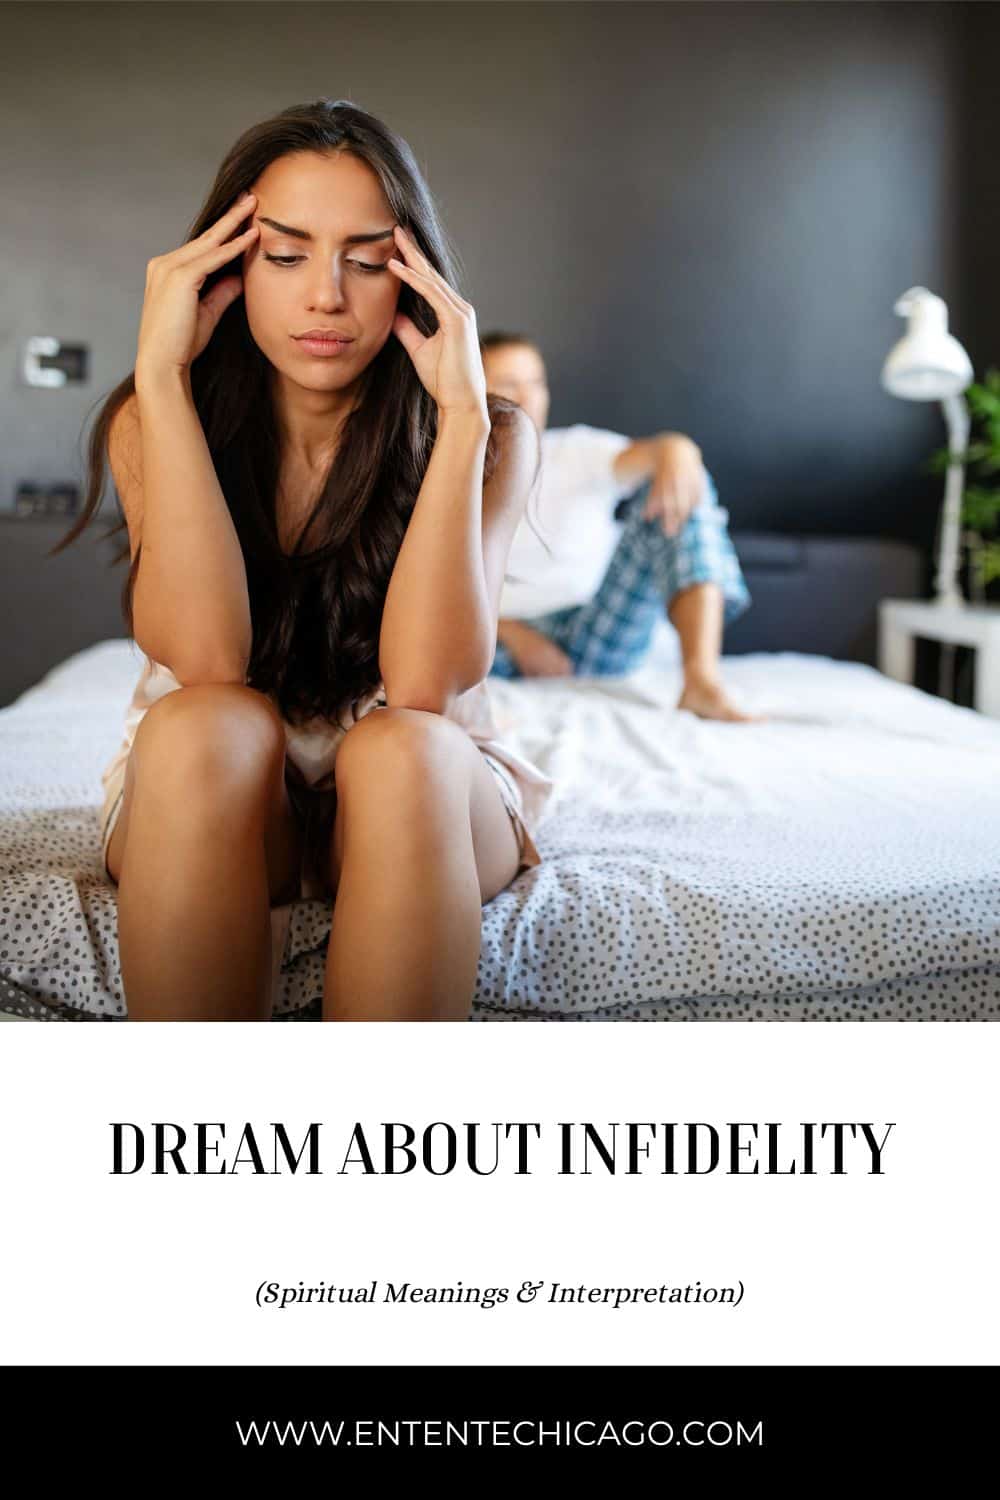 What Does It Mean To Dream About Infidelity